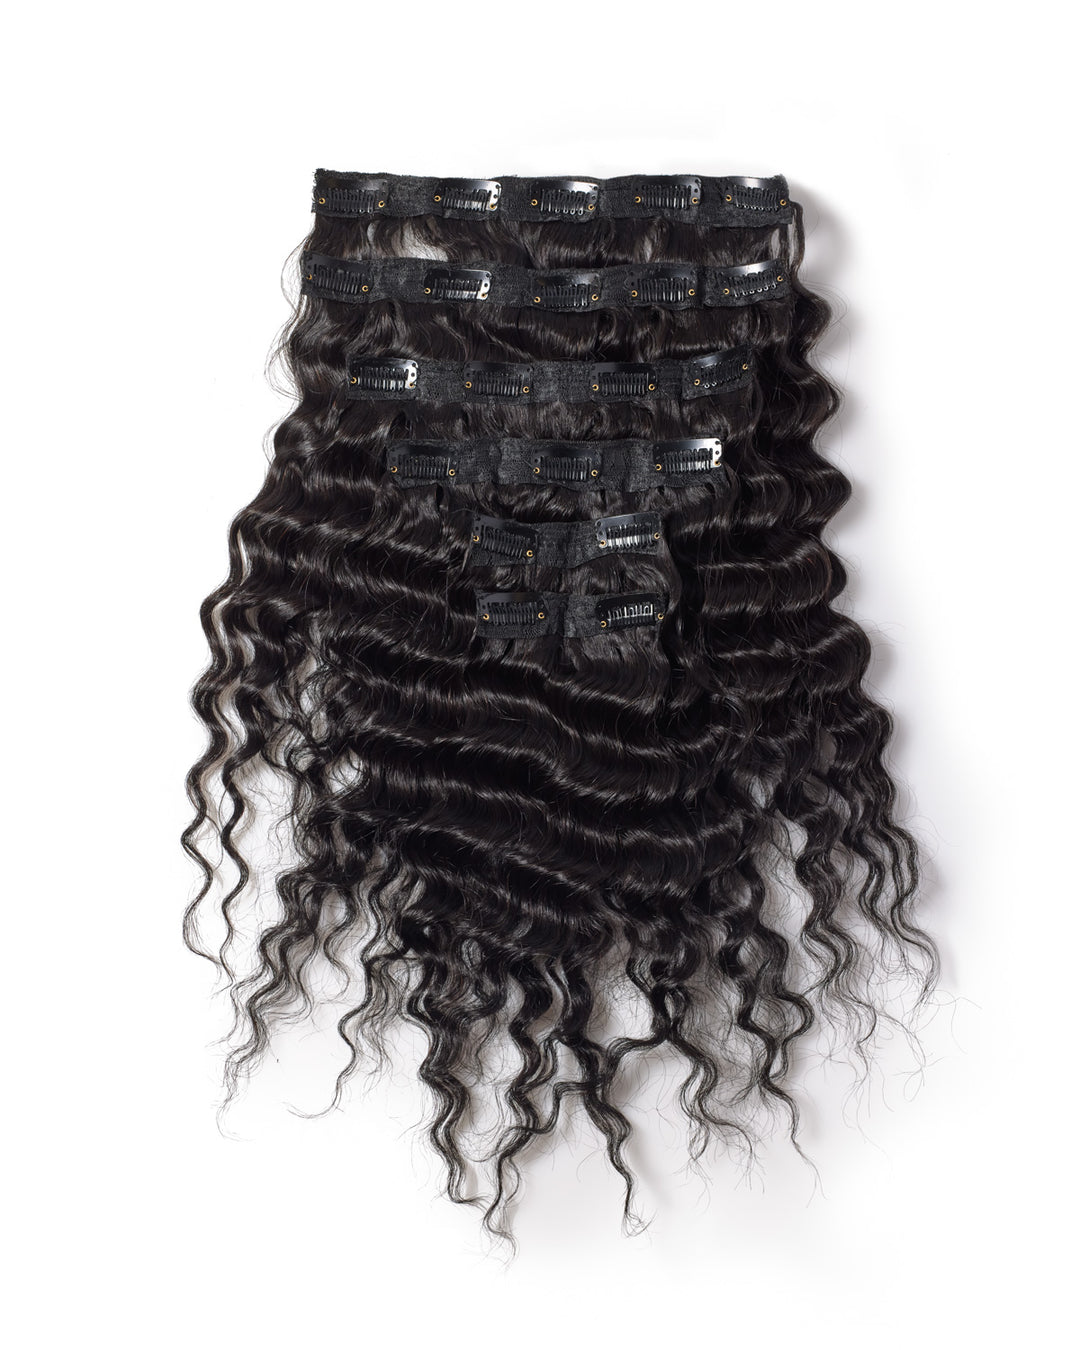 Klassiker: CAMBODIAN CURLY CLIP IN EXTENSIONS